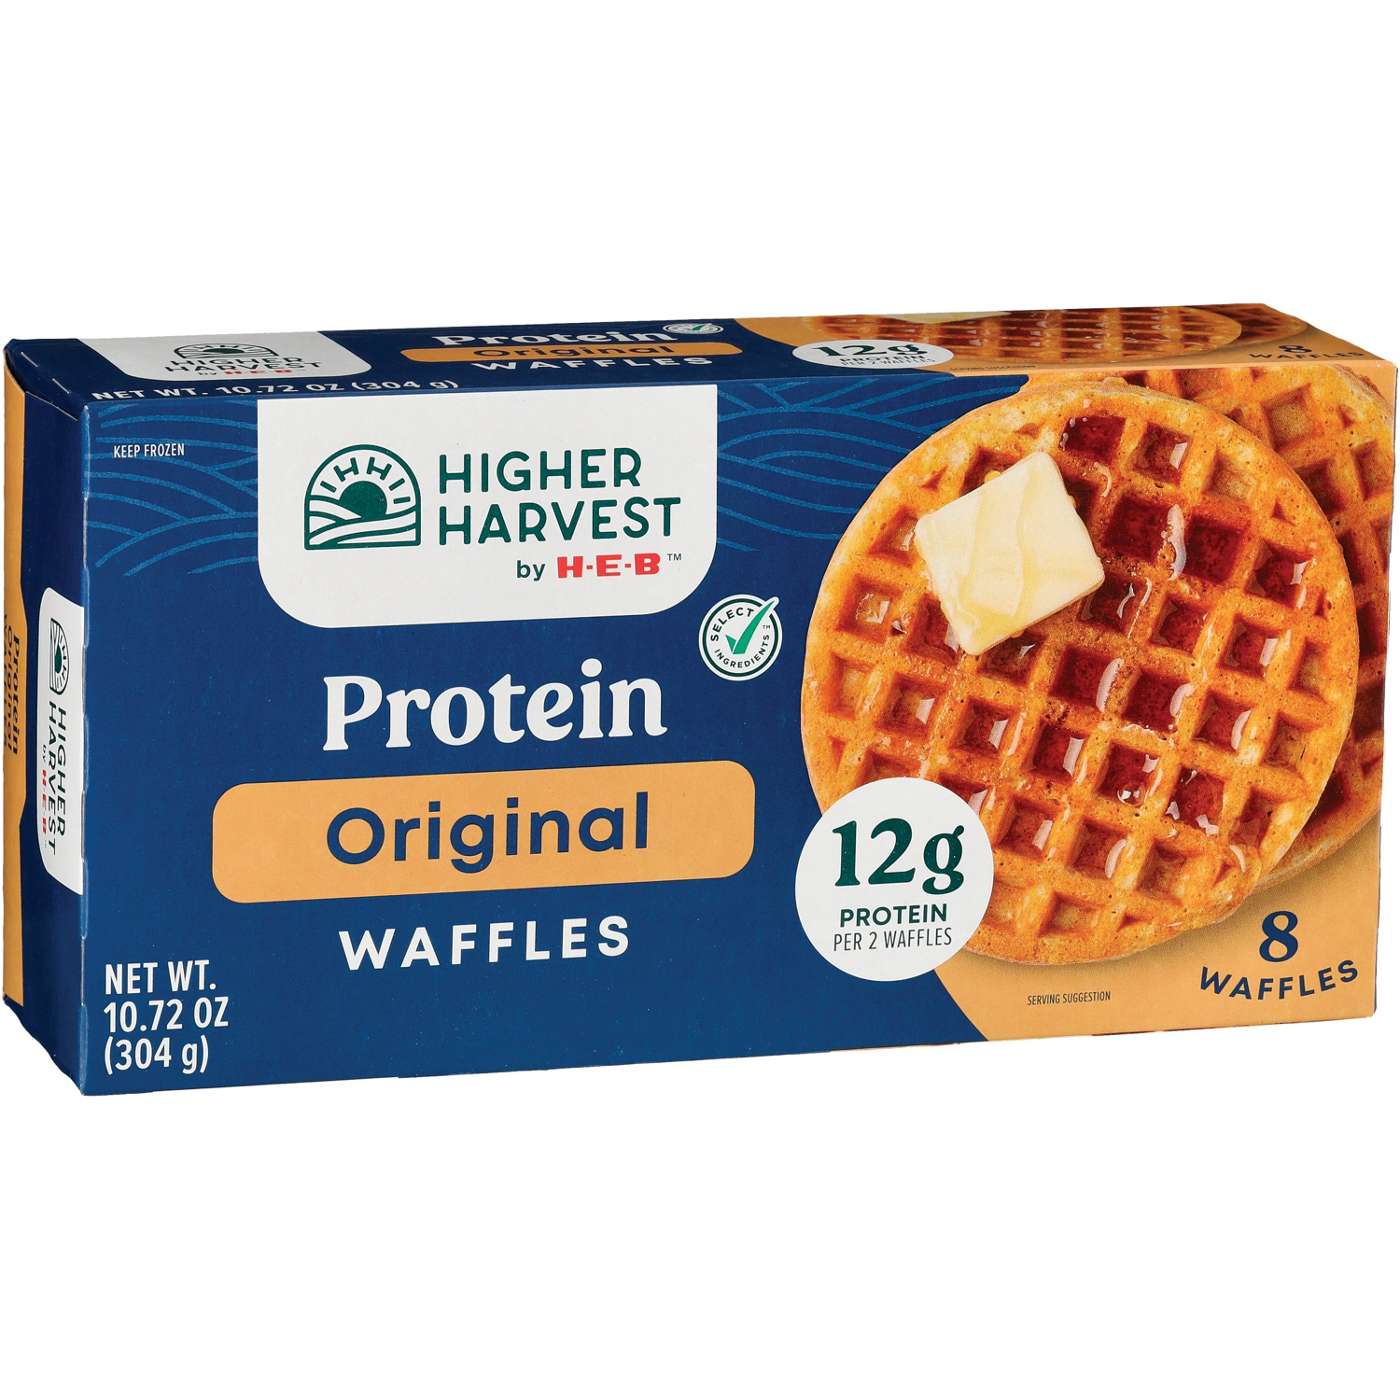 Higher Harvest by H-E-B 12g Protein Frozen Waffles – Original; image 2 of 2